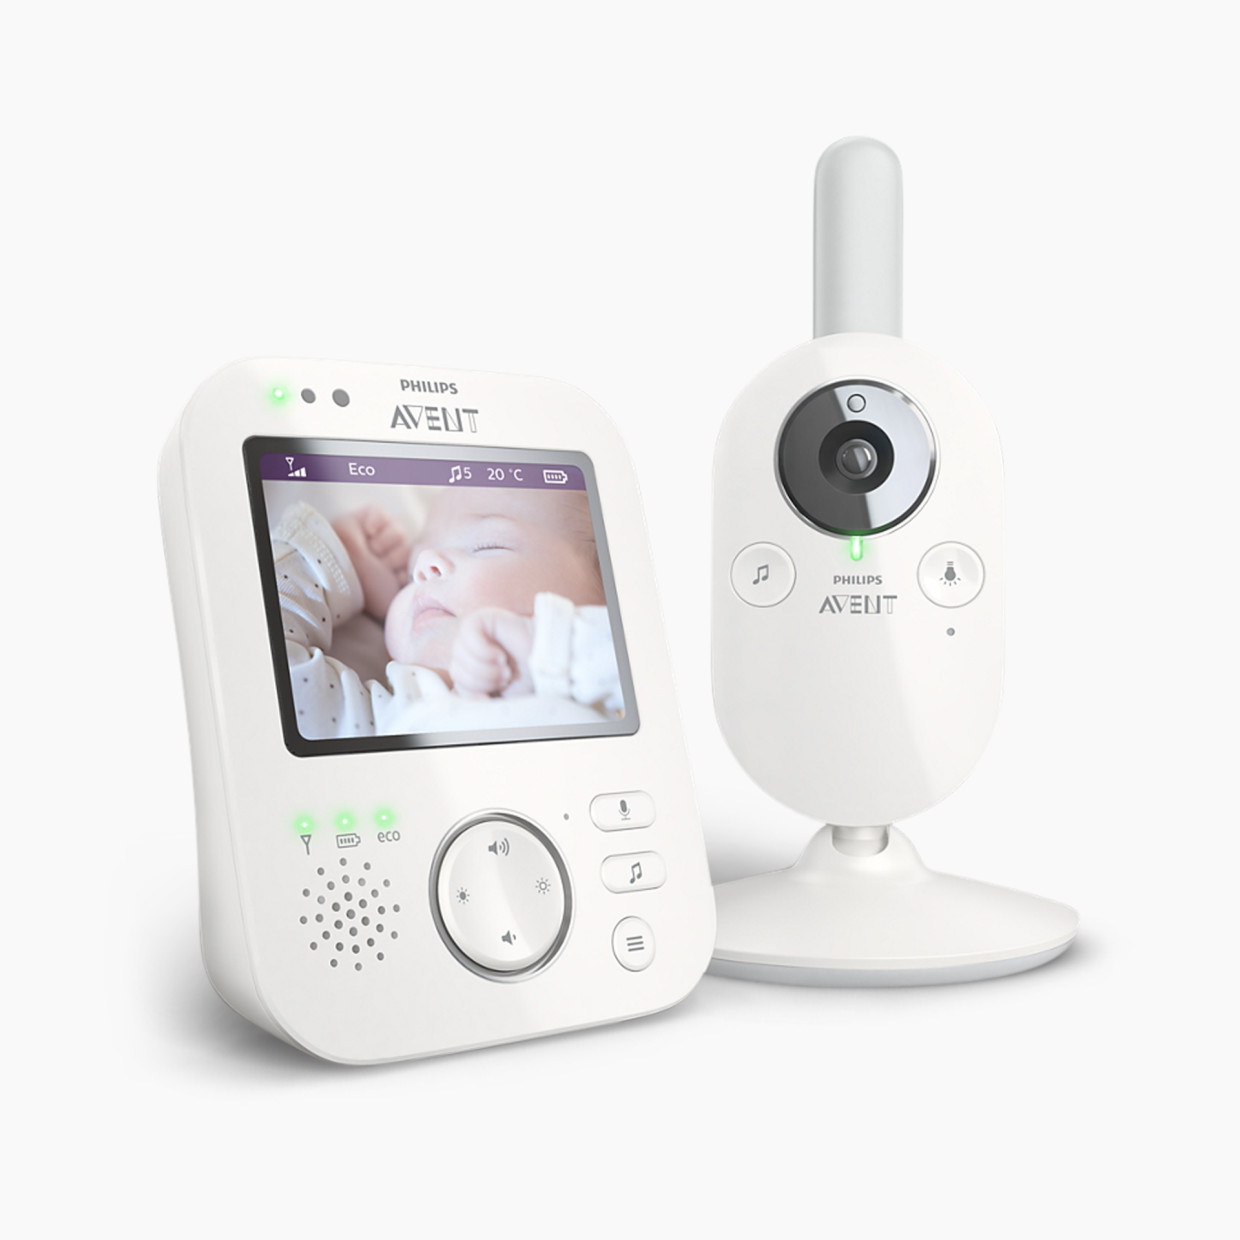 Philips Avent Digital Video Baby Monitor with A-FHSS.